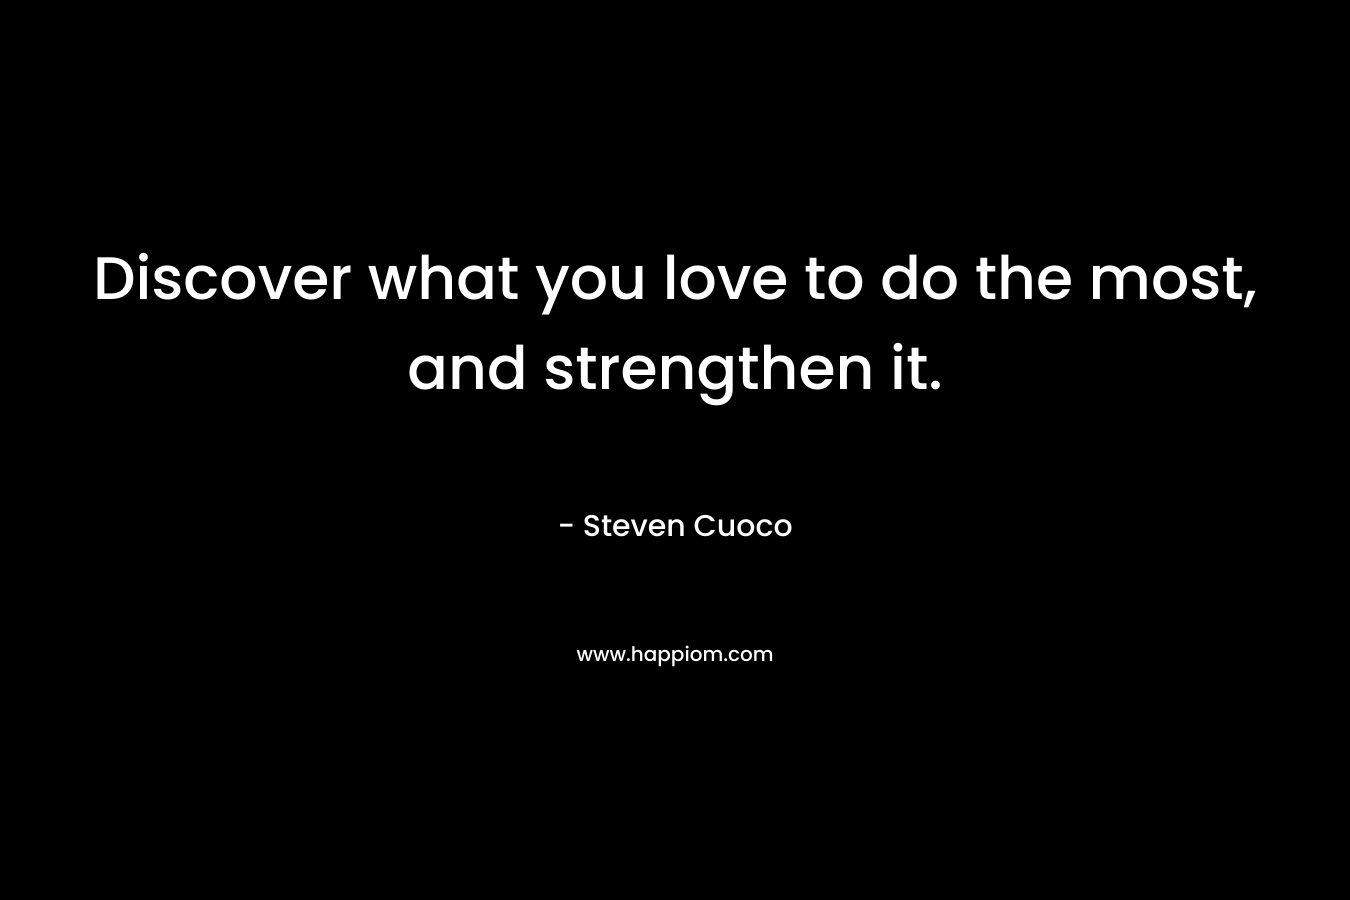 Discover what you love to do the most, and strengthen it.